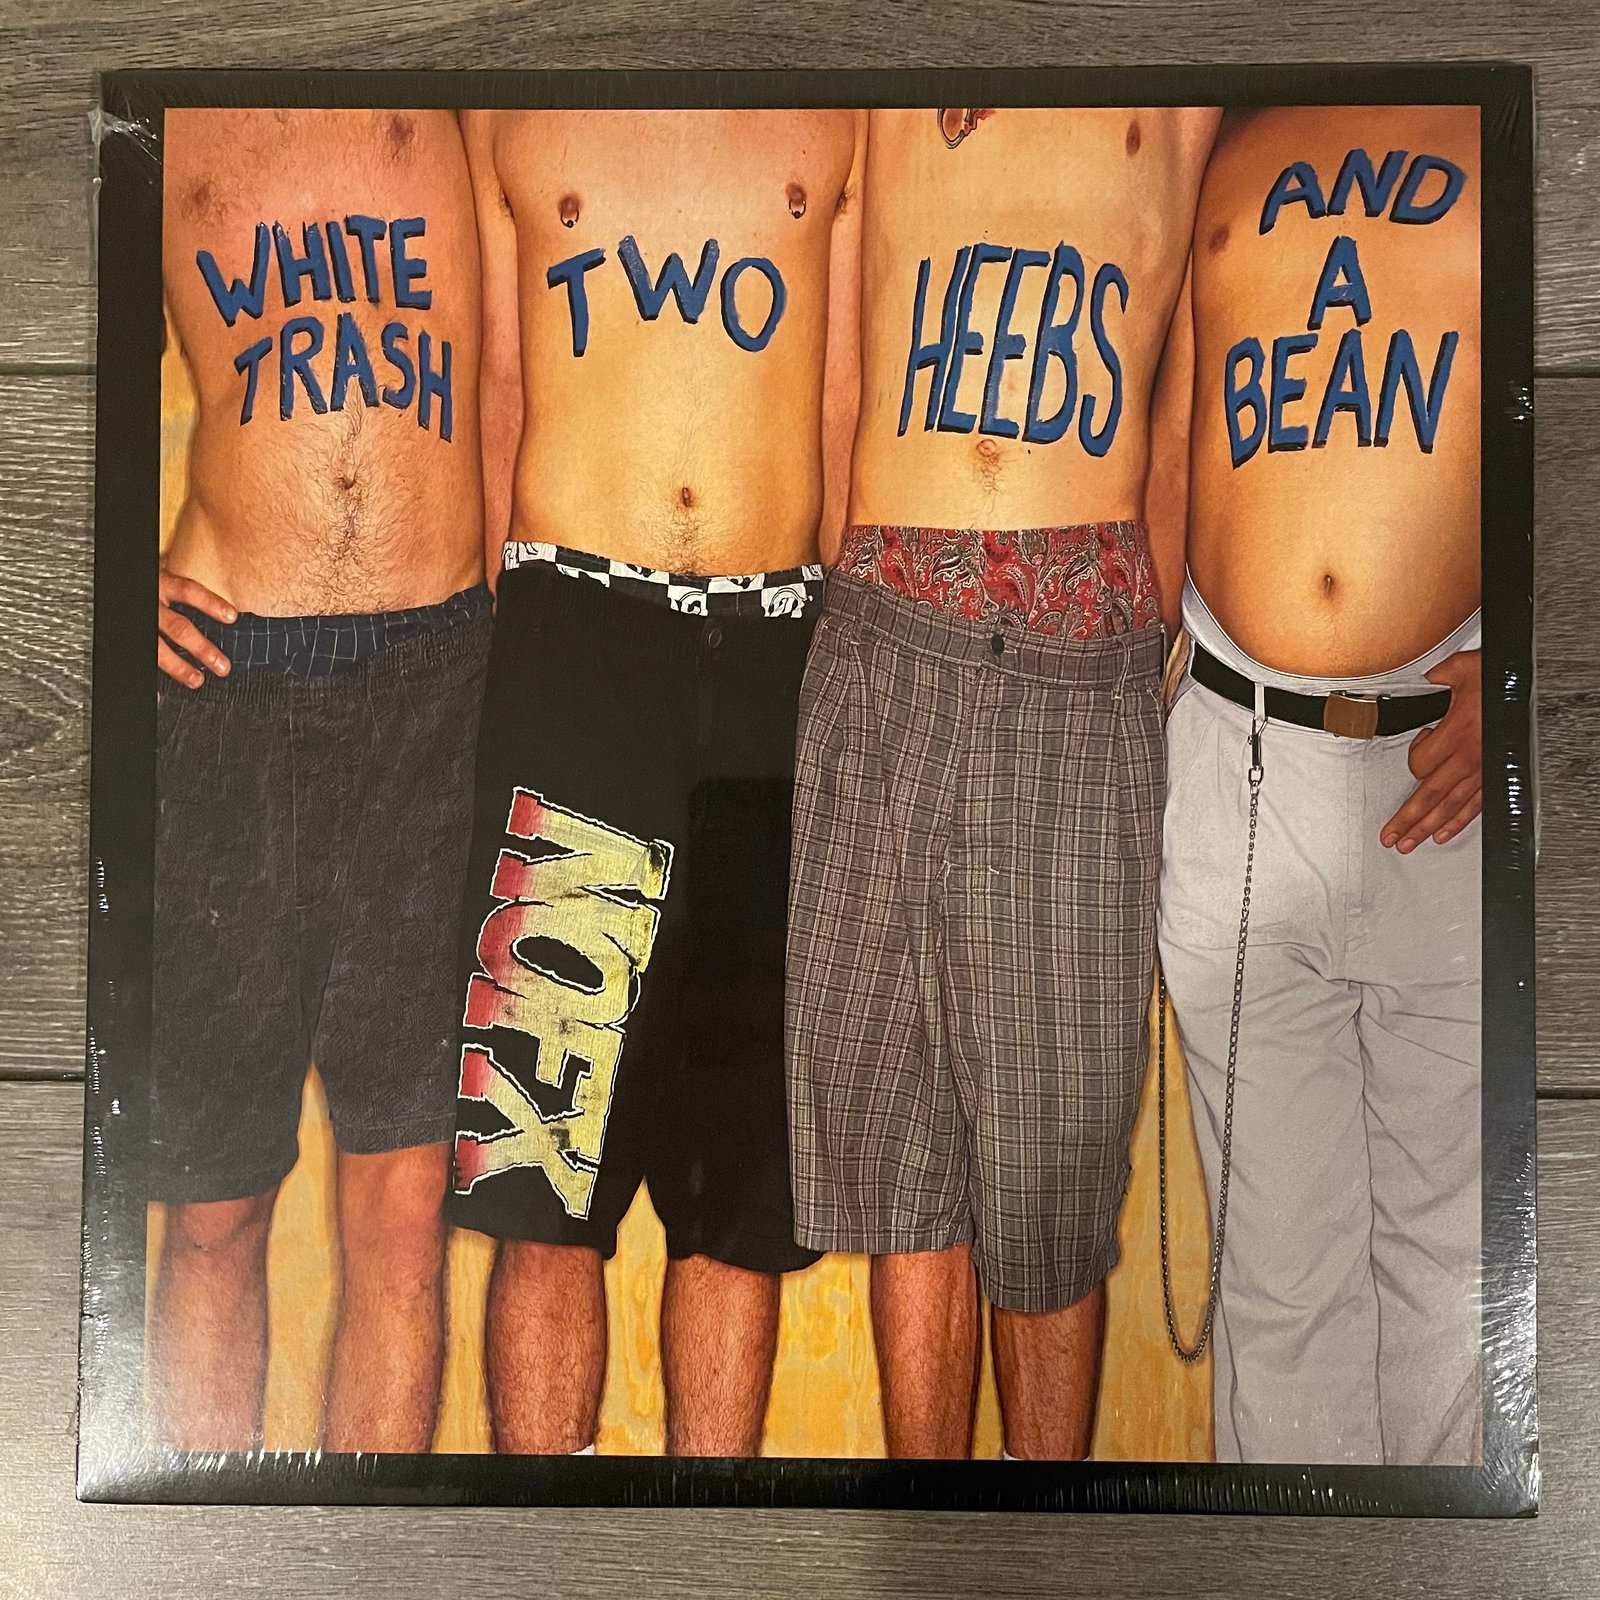 NOFX - White Trash, Two Heebs And A Bean Vinyl LP / Cali Vibes